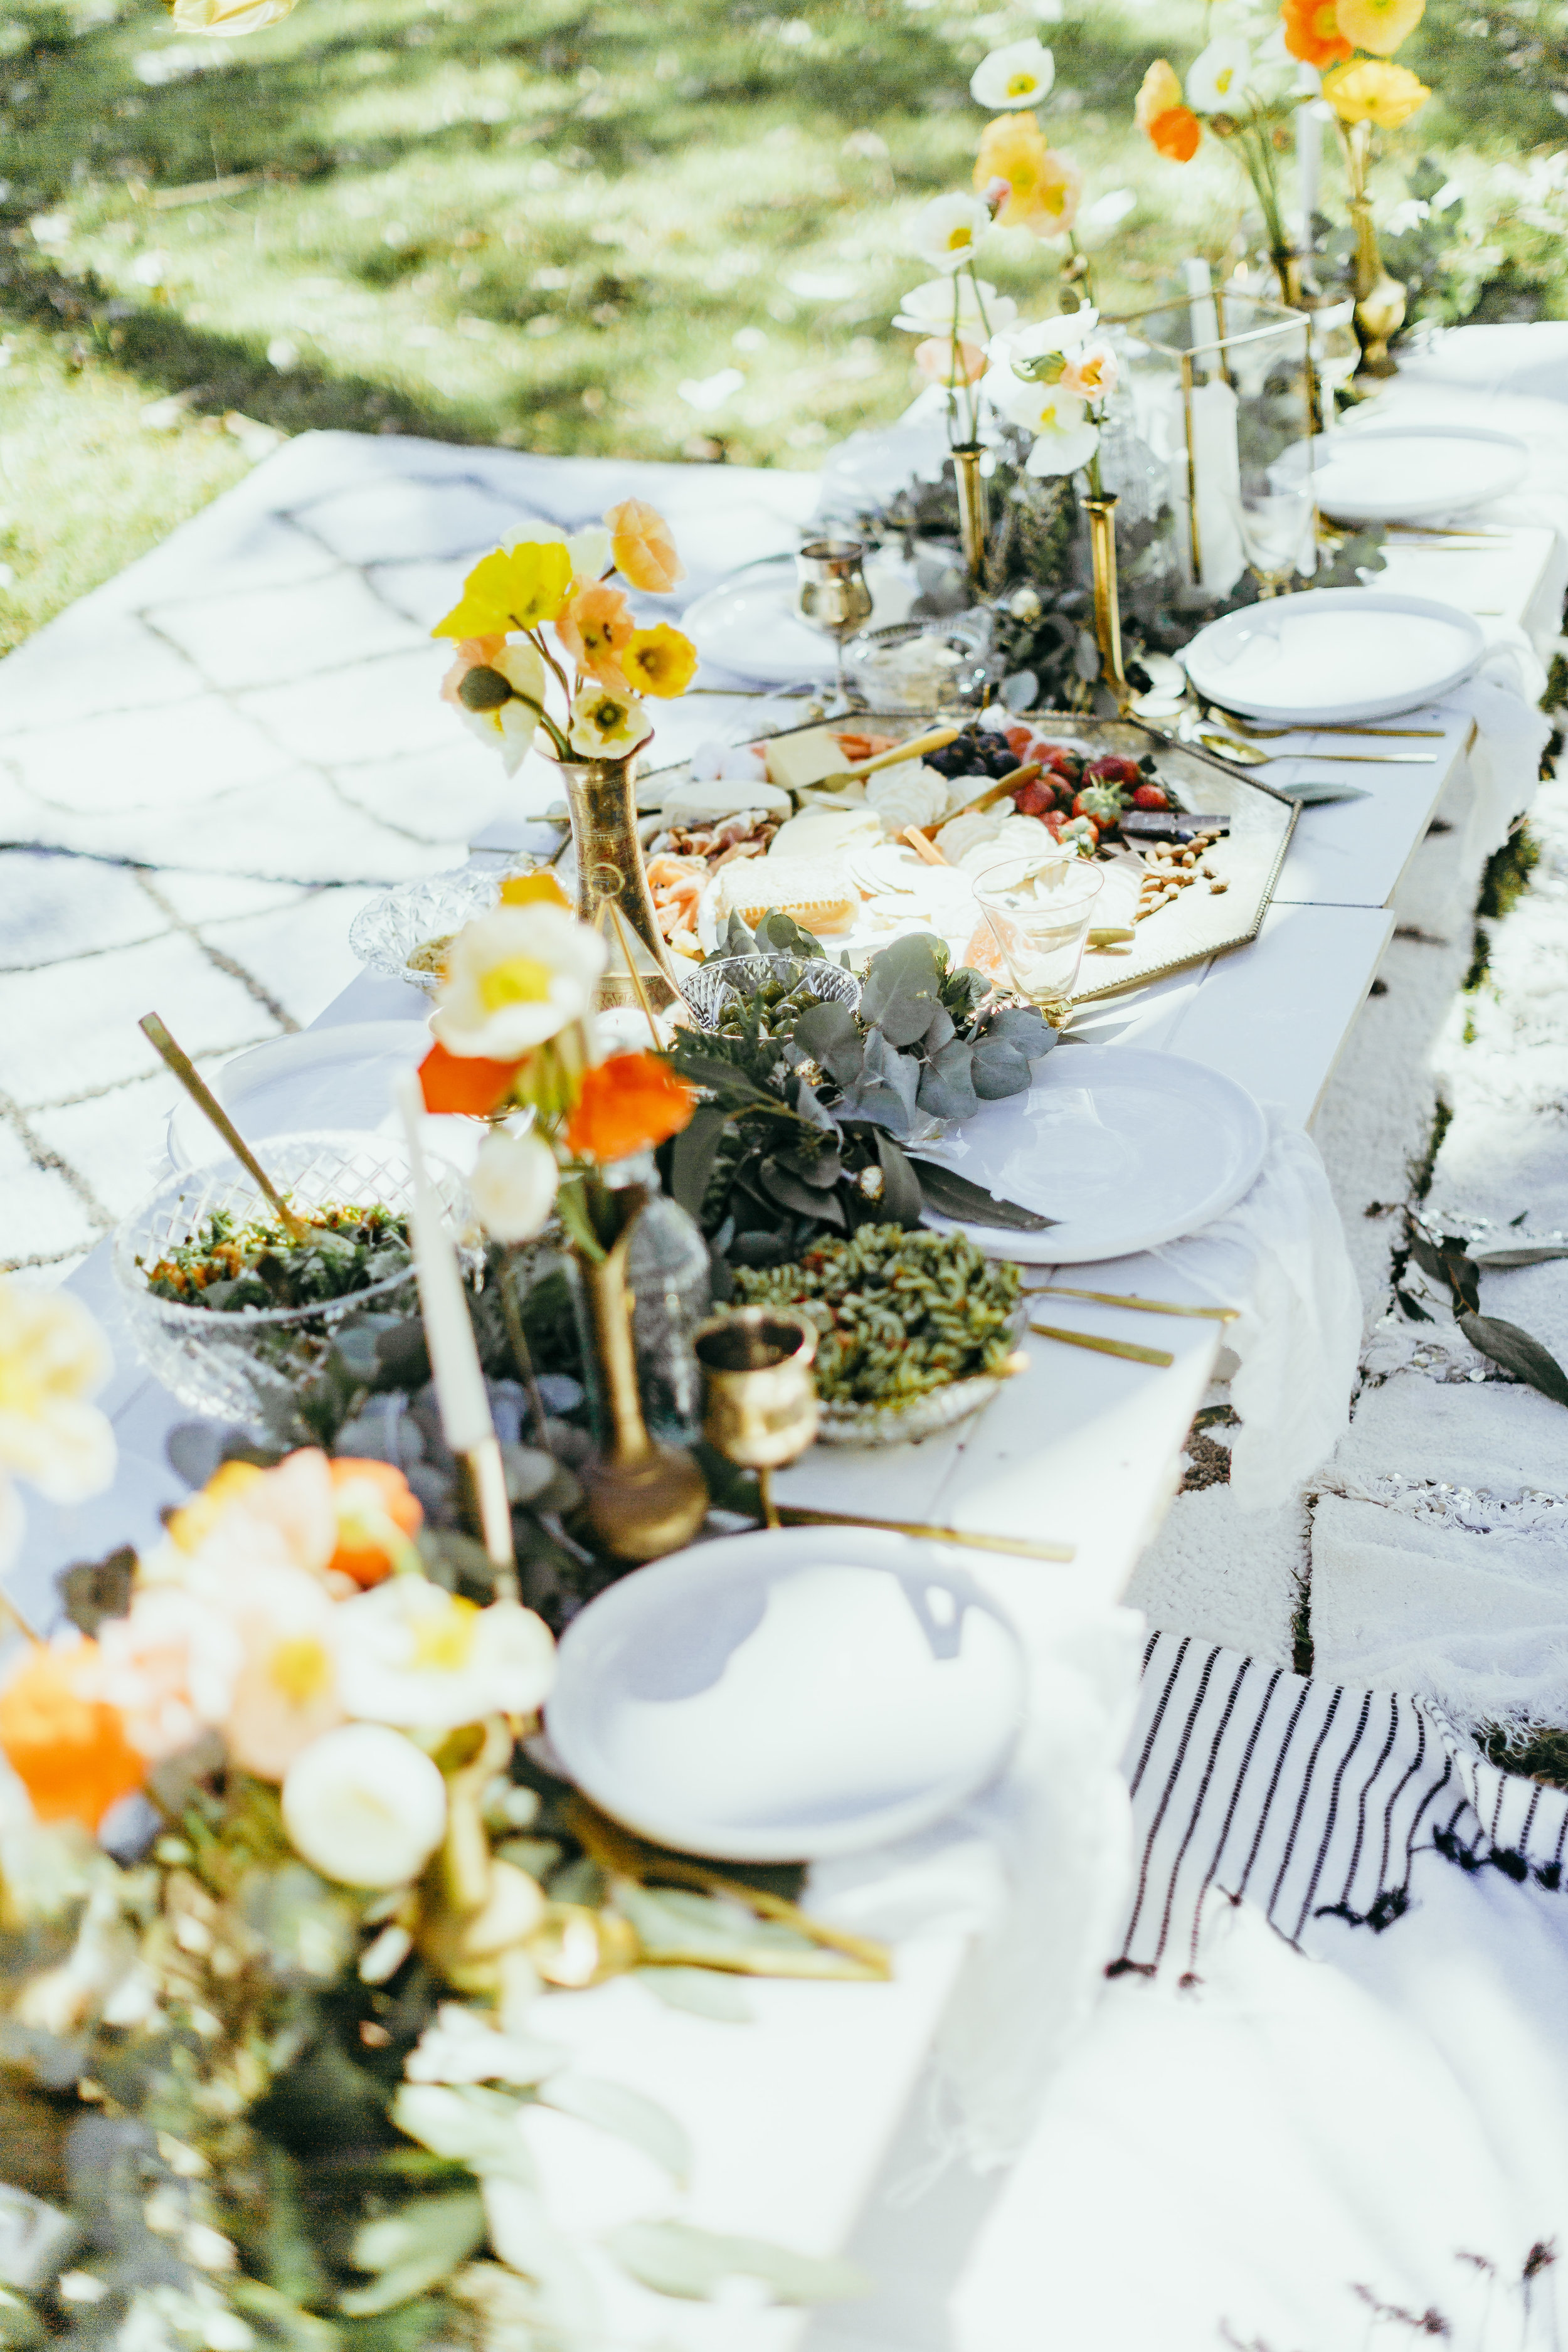 Birthday party styled with floral table settings, grazing plates, chocolate meringue, flower crowns and confetti